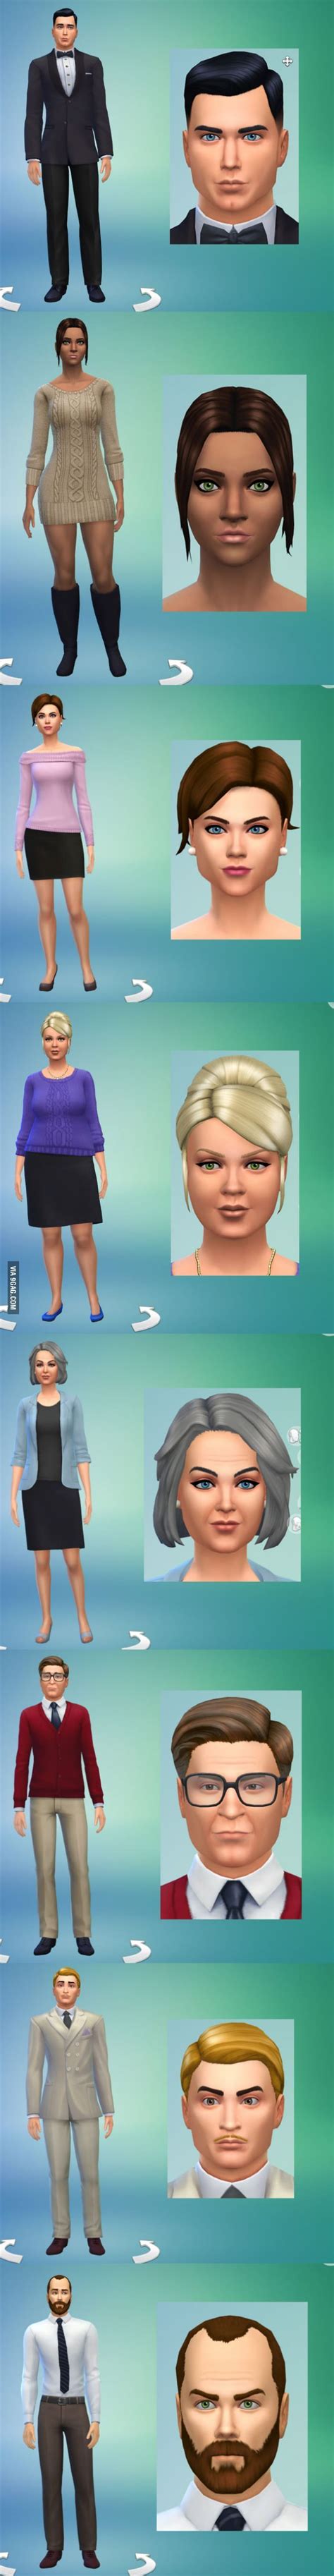 Archer Cast Done In The Sims 4 Character Creator Gaming Sims 4